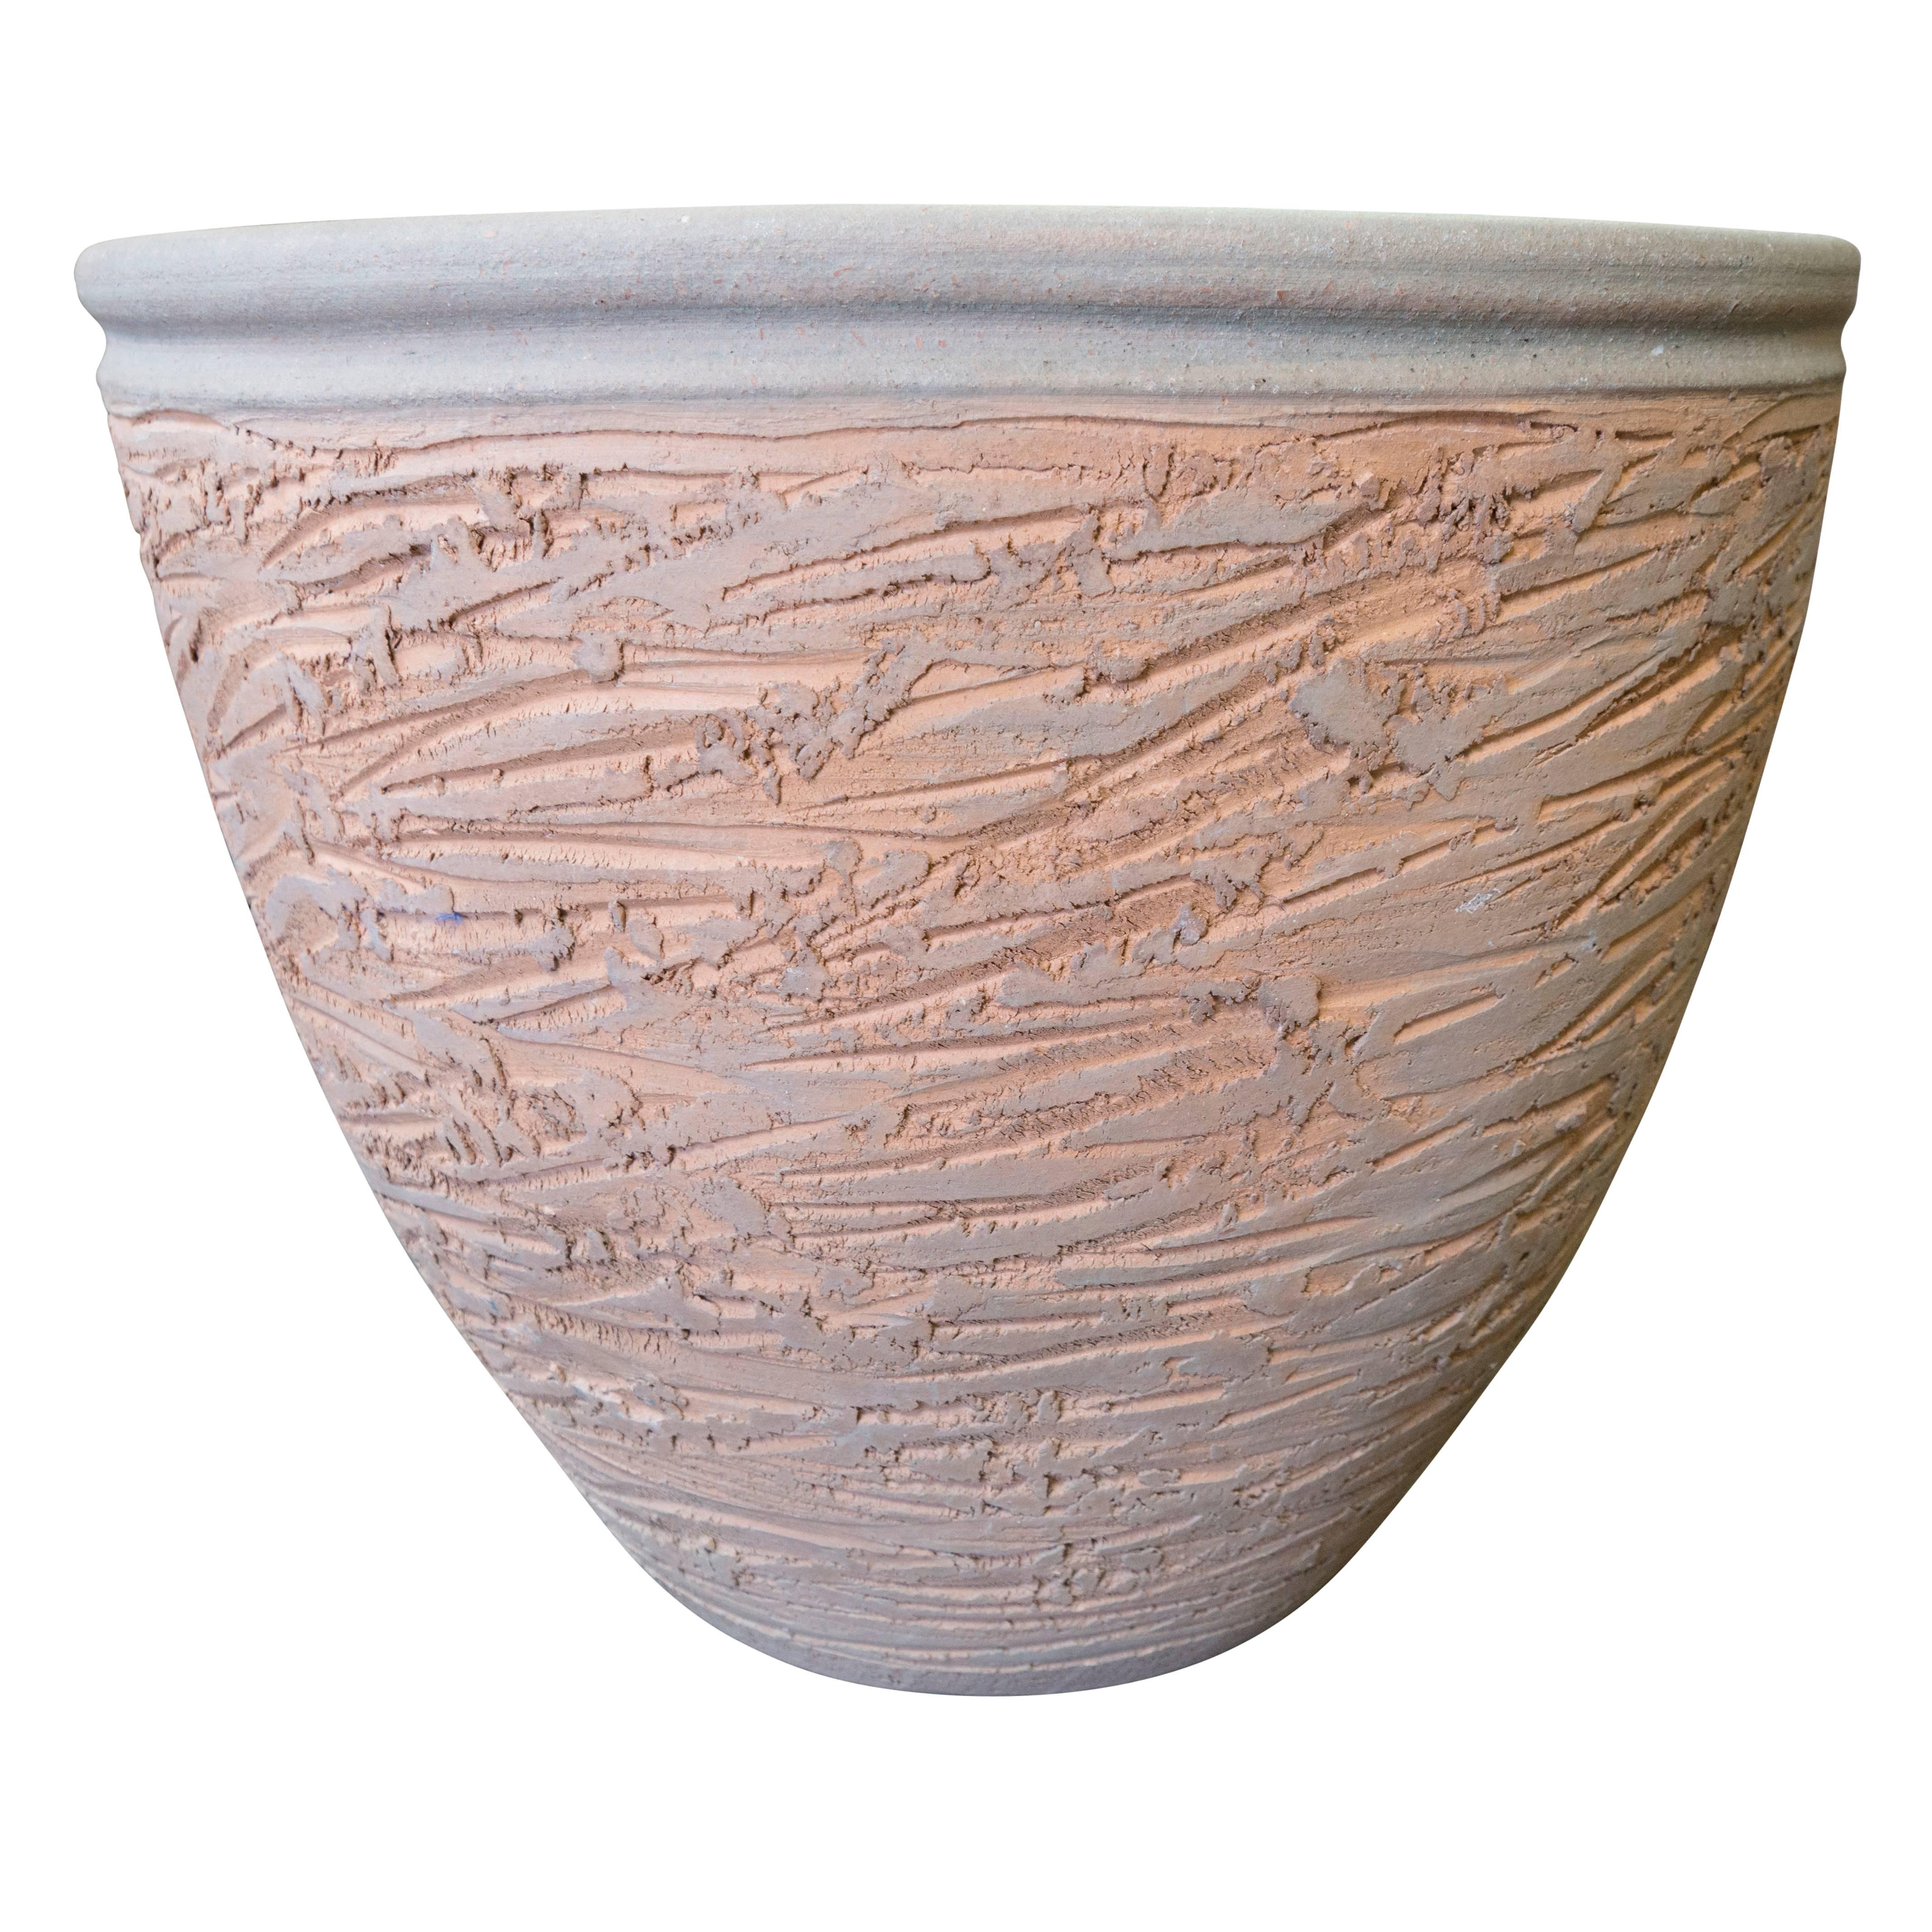 Featuring a scrape pot style body in an unusual bright orange-ish terracotta color with a light blue rolled rim. Art for the home or garden by Hans Sumpf.